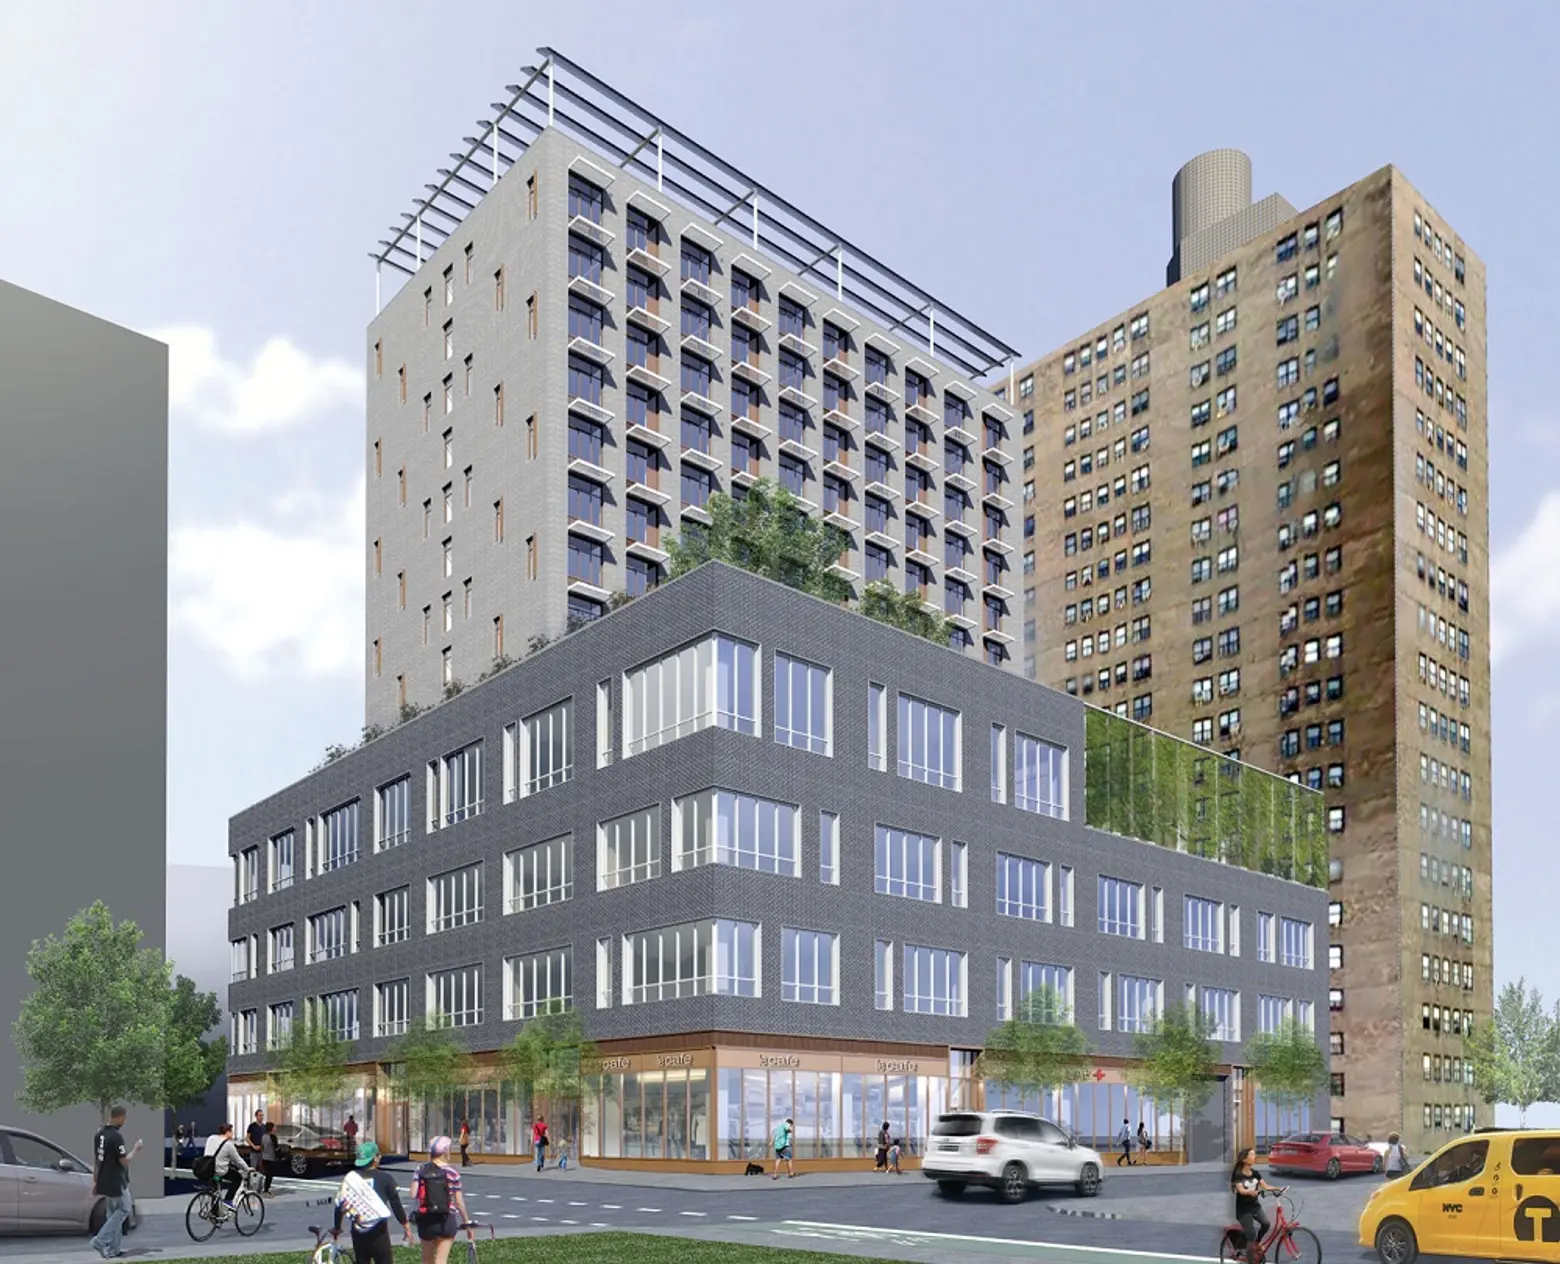 Affordable senior housing development is the first building to open at Essex Crossing